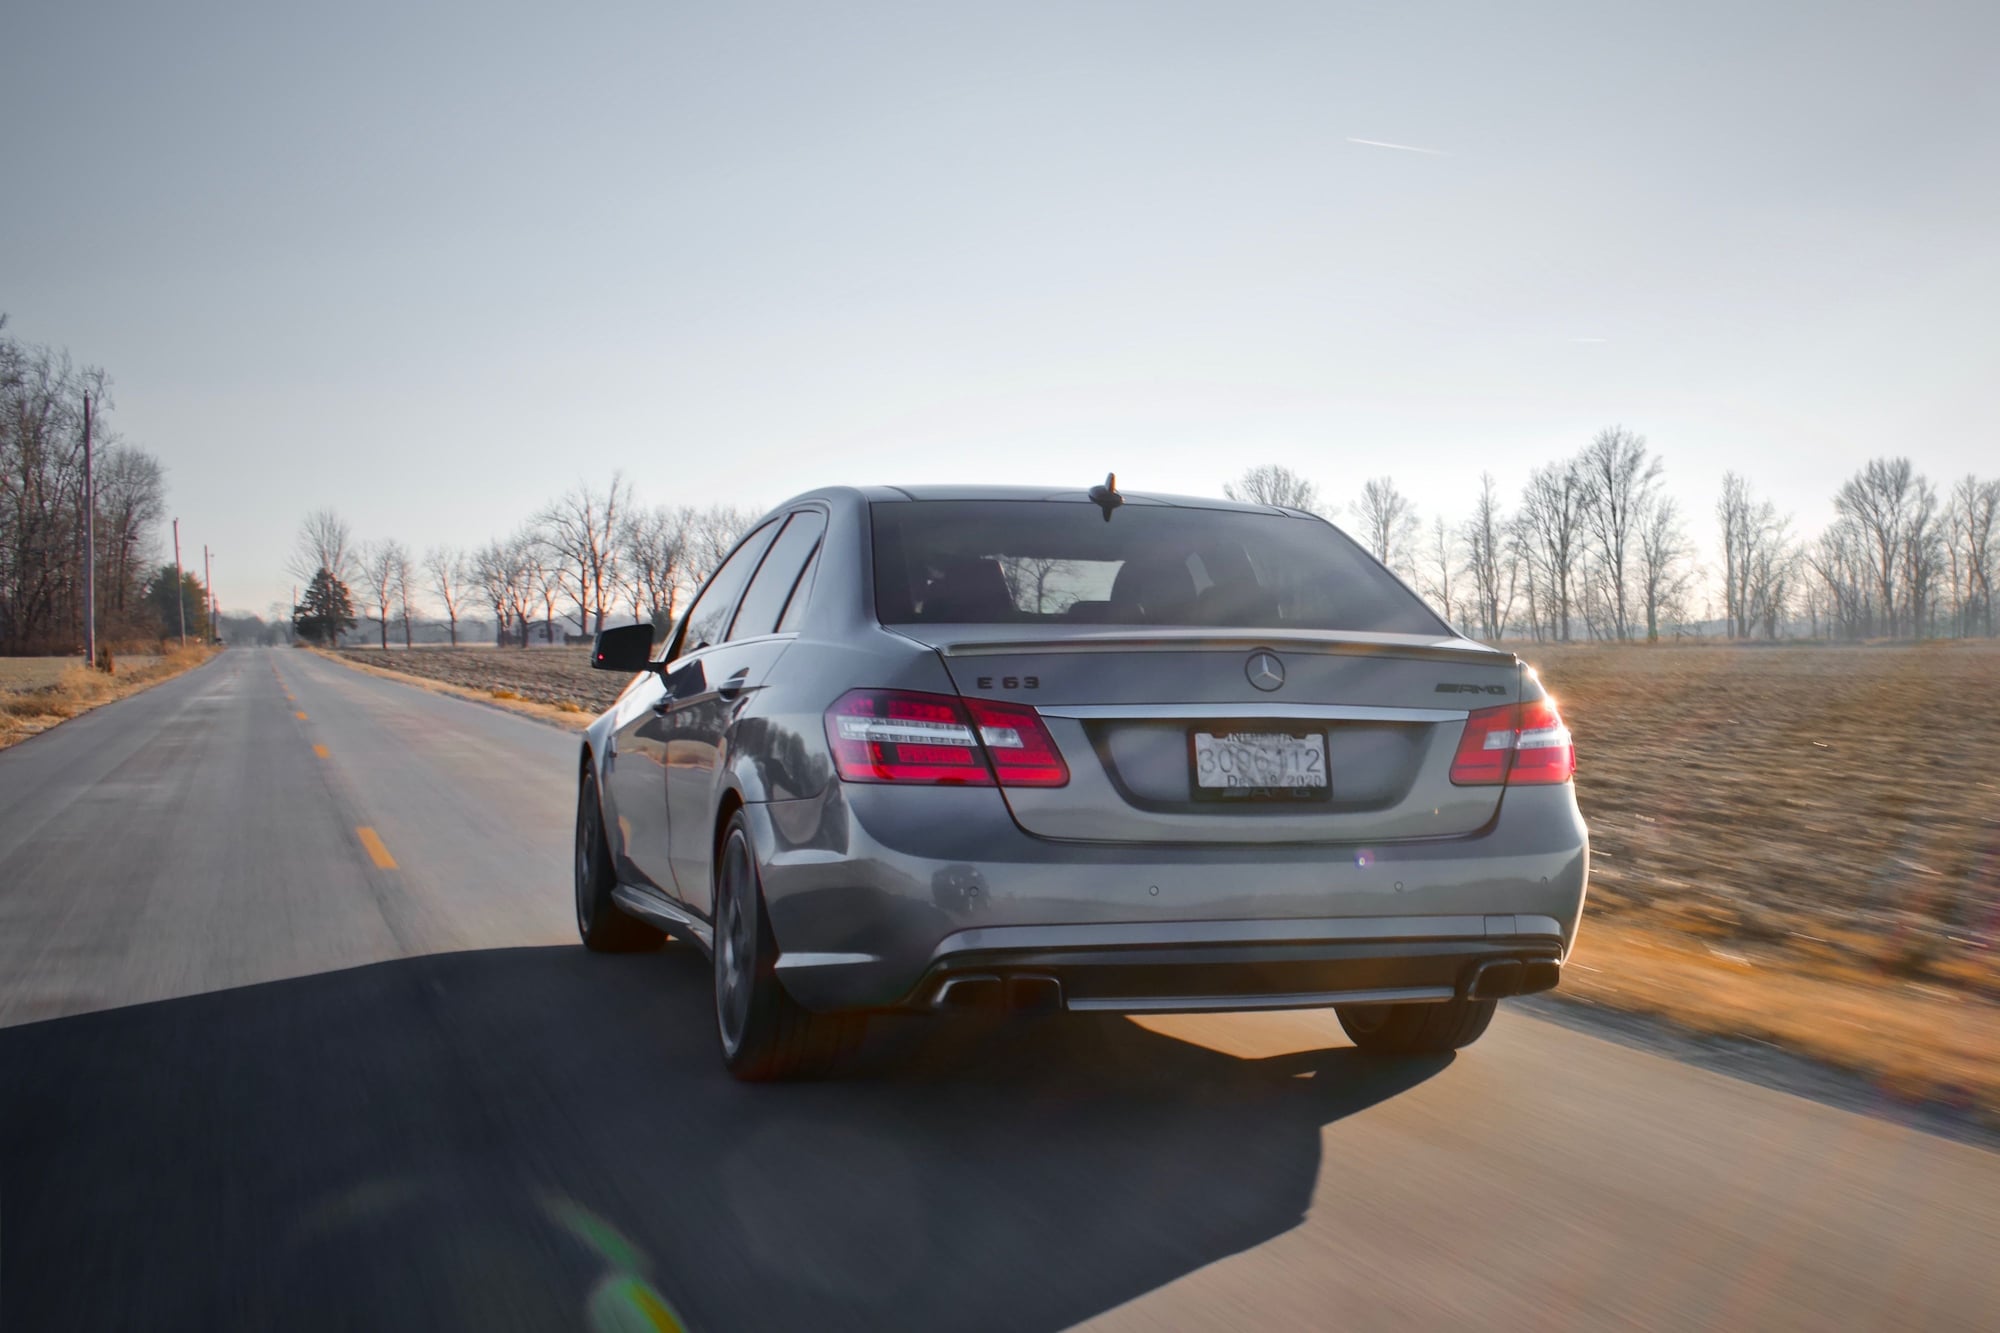 2012 Mercedes-Benz E63 AMG - 2012 E63 amg (610 WHP) - Used - VIN WDDHF7EB3CA532688 - 90,000 Miles - 8 cyl - 2WD - Automatic - Sedan - Silver - Fishers, IN 46055, United States